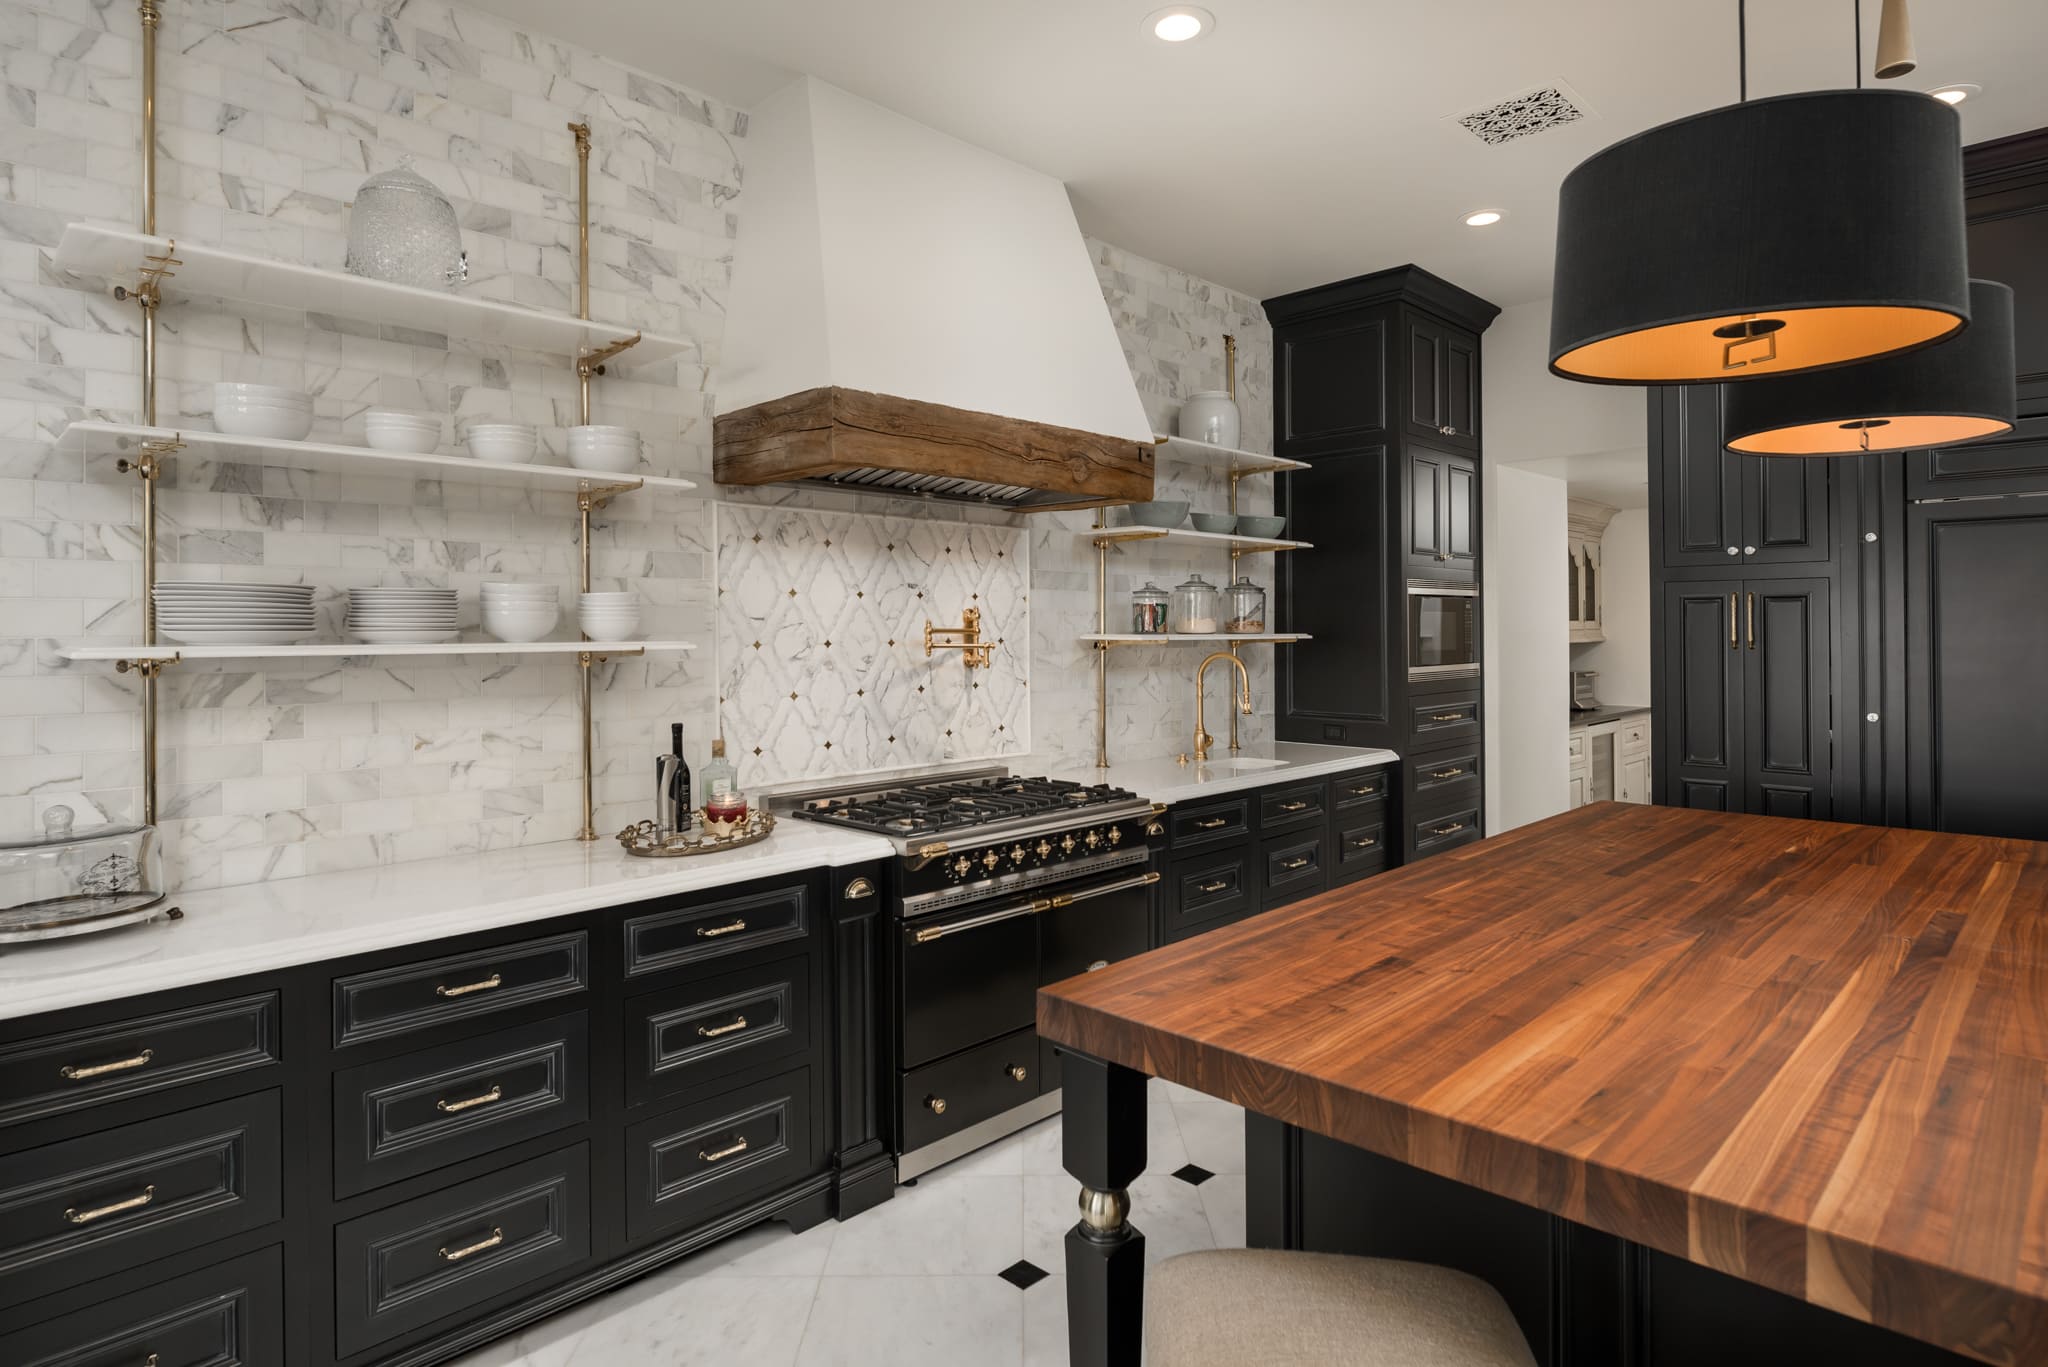 The Aesthetics and Benefits of Tri-Tone Kitchens